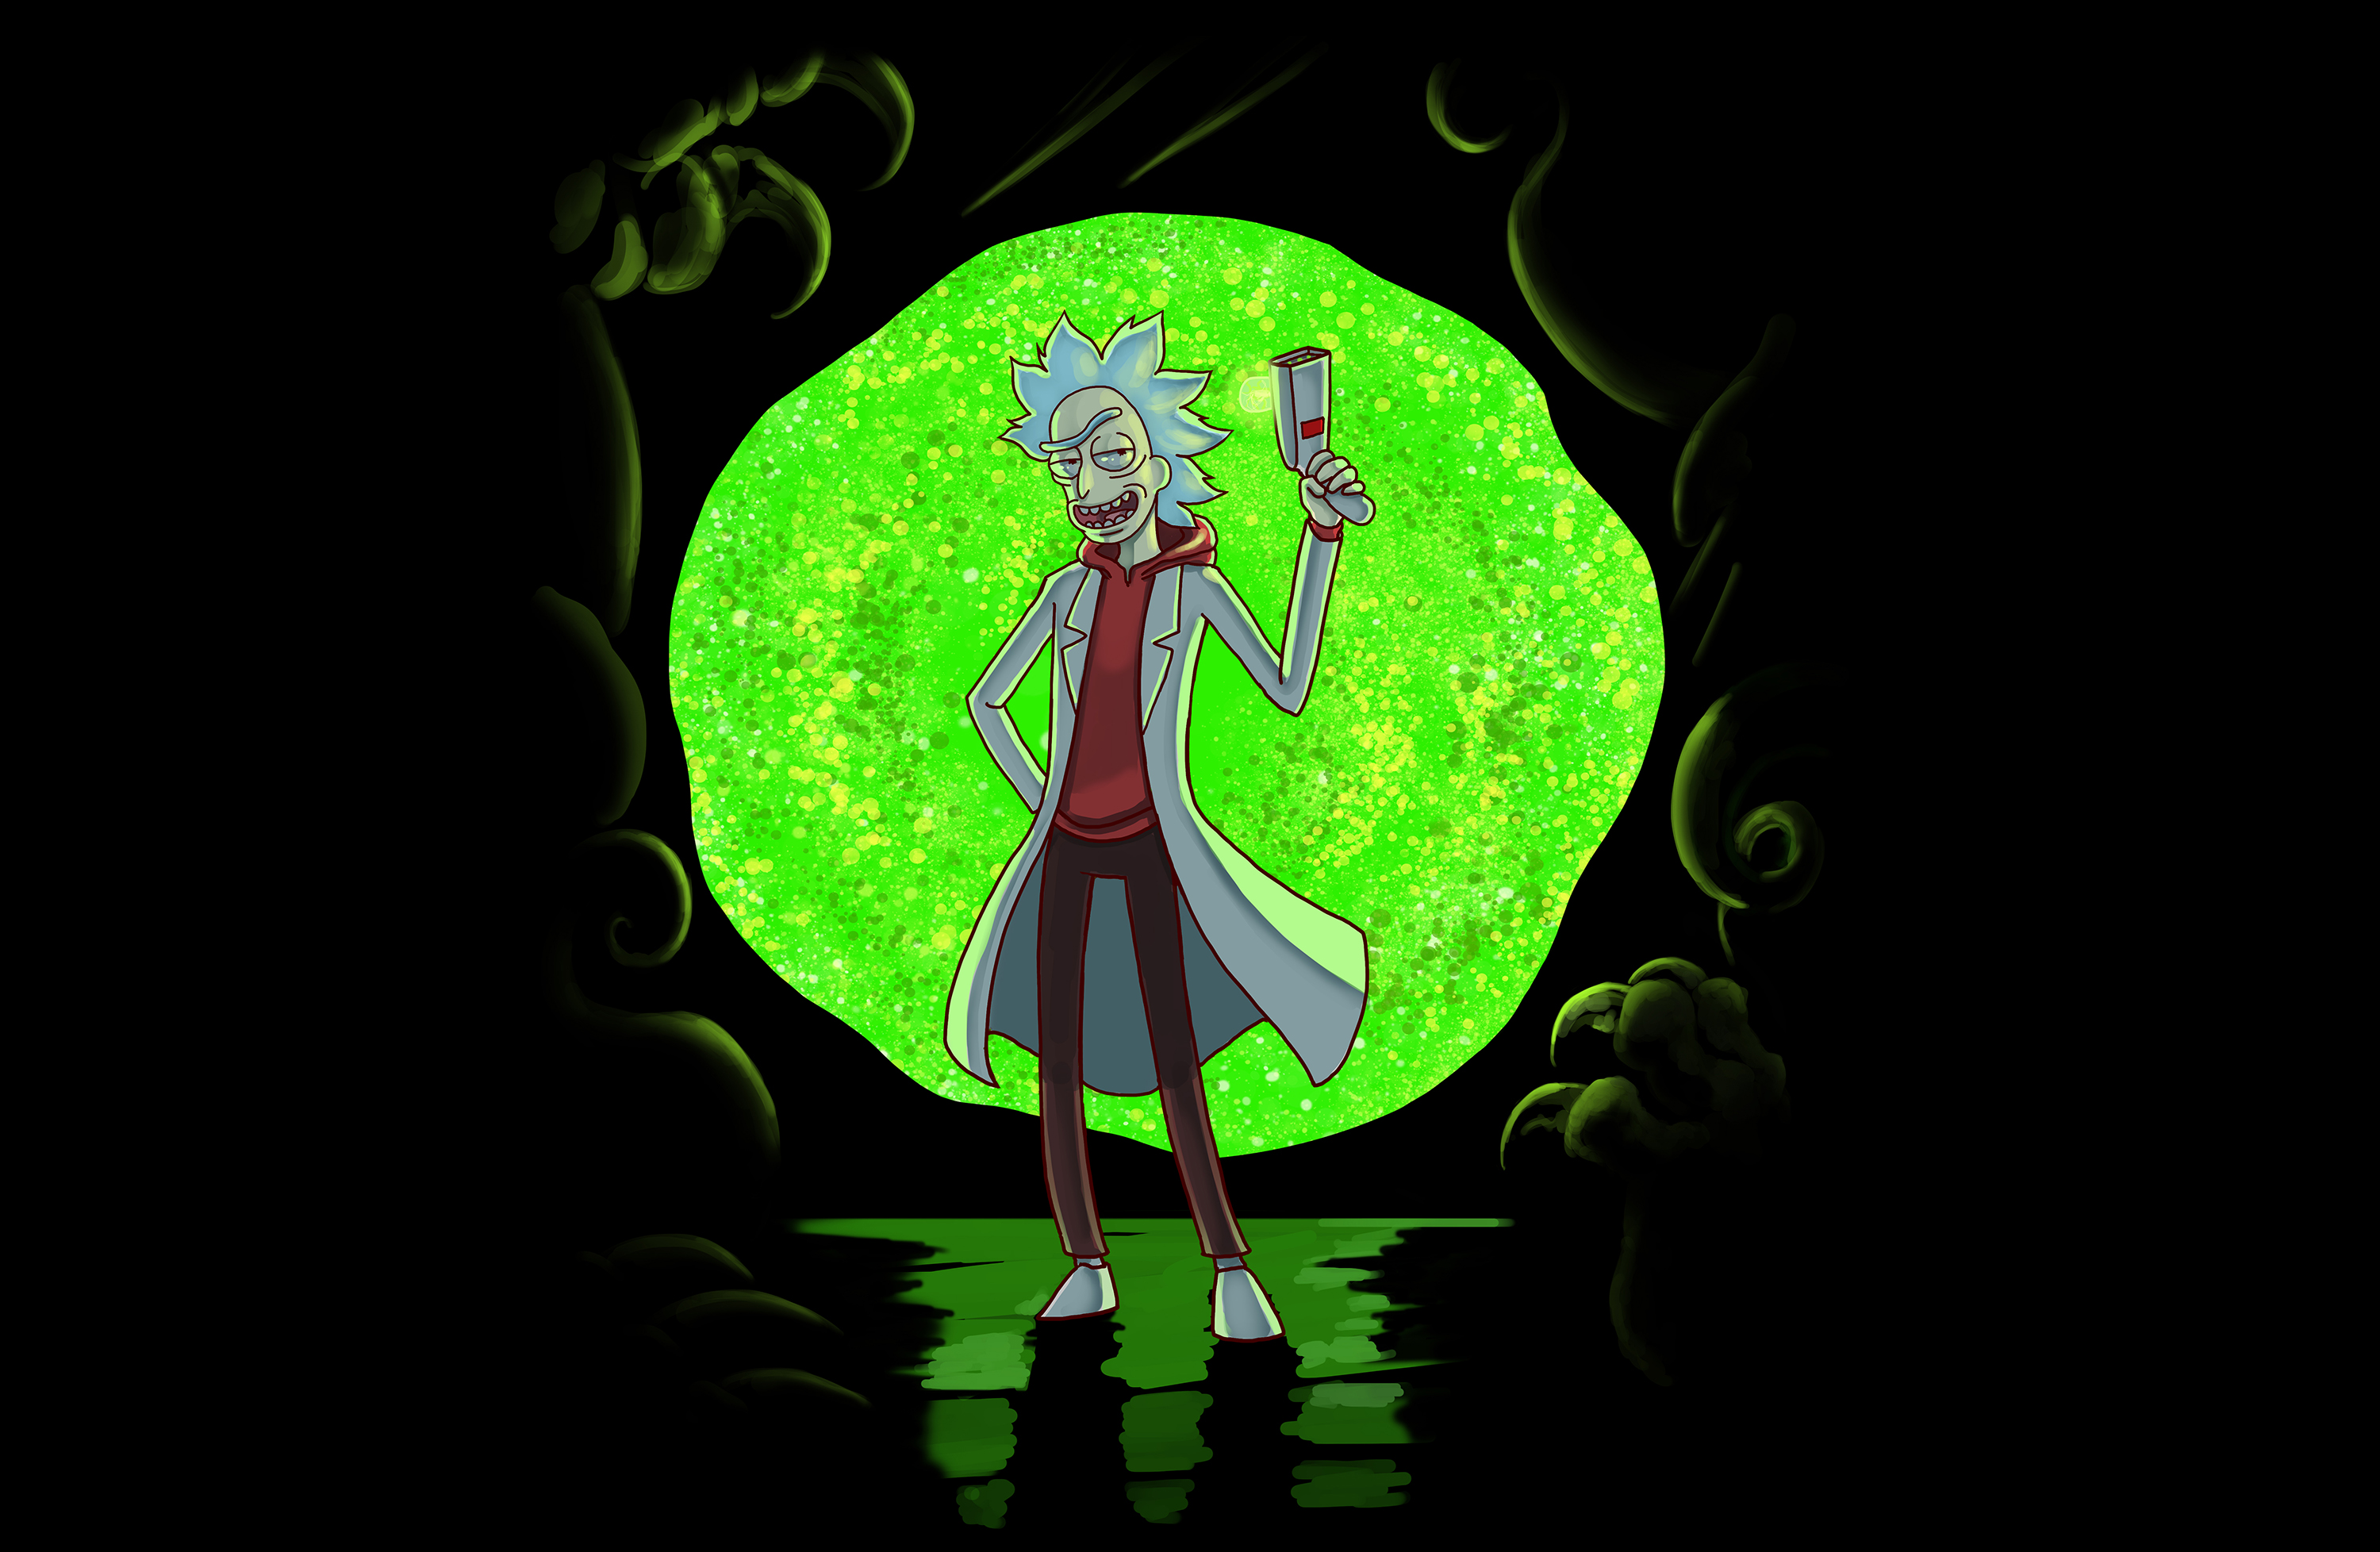 Wallpaper Windows, Rick, rick, windows 10, rick and morty, Rick and Morty,  morti, rickandmorty for mobile and desktop, section фантастика, resolution  3840x2160 - download